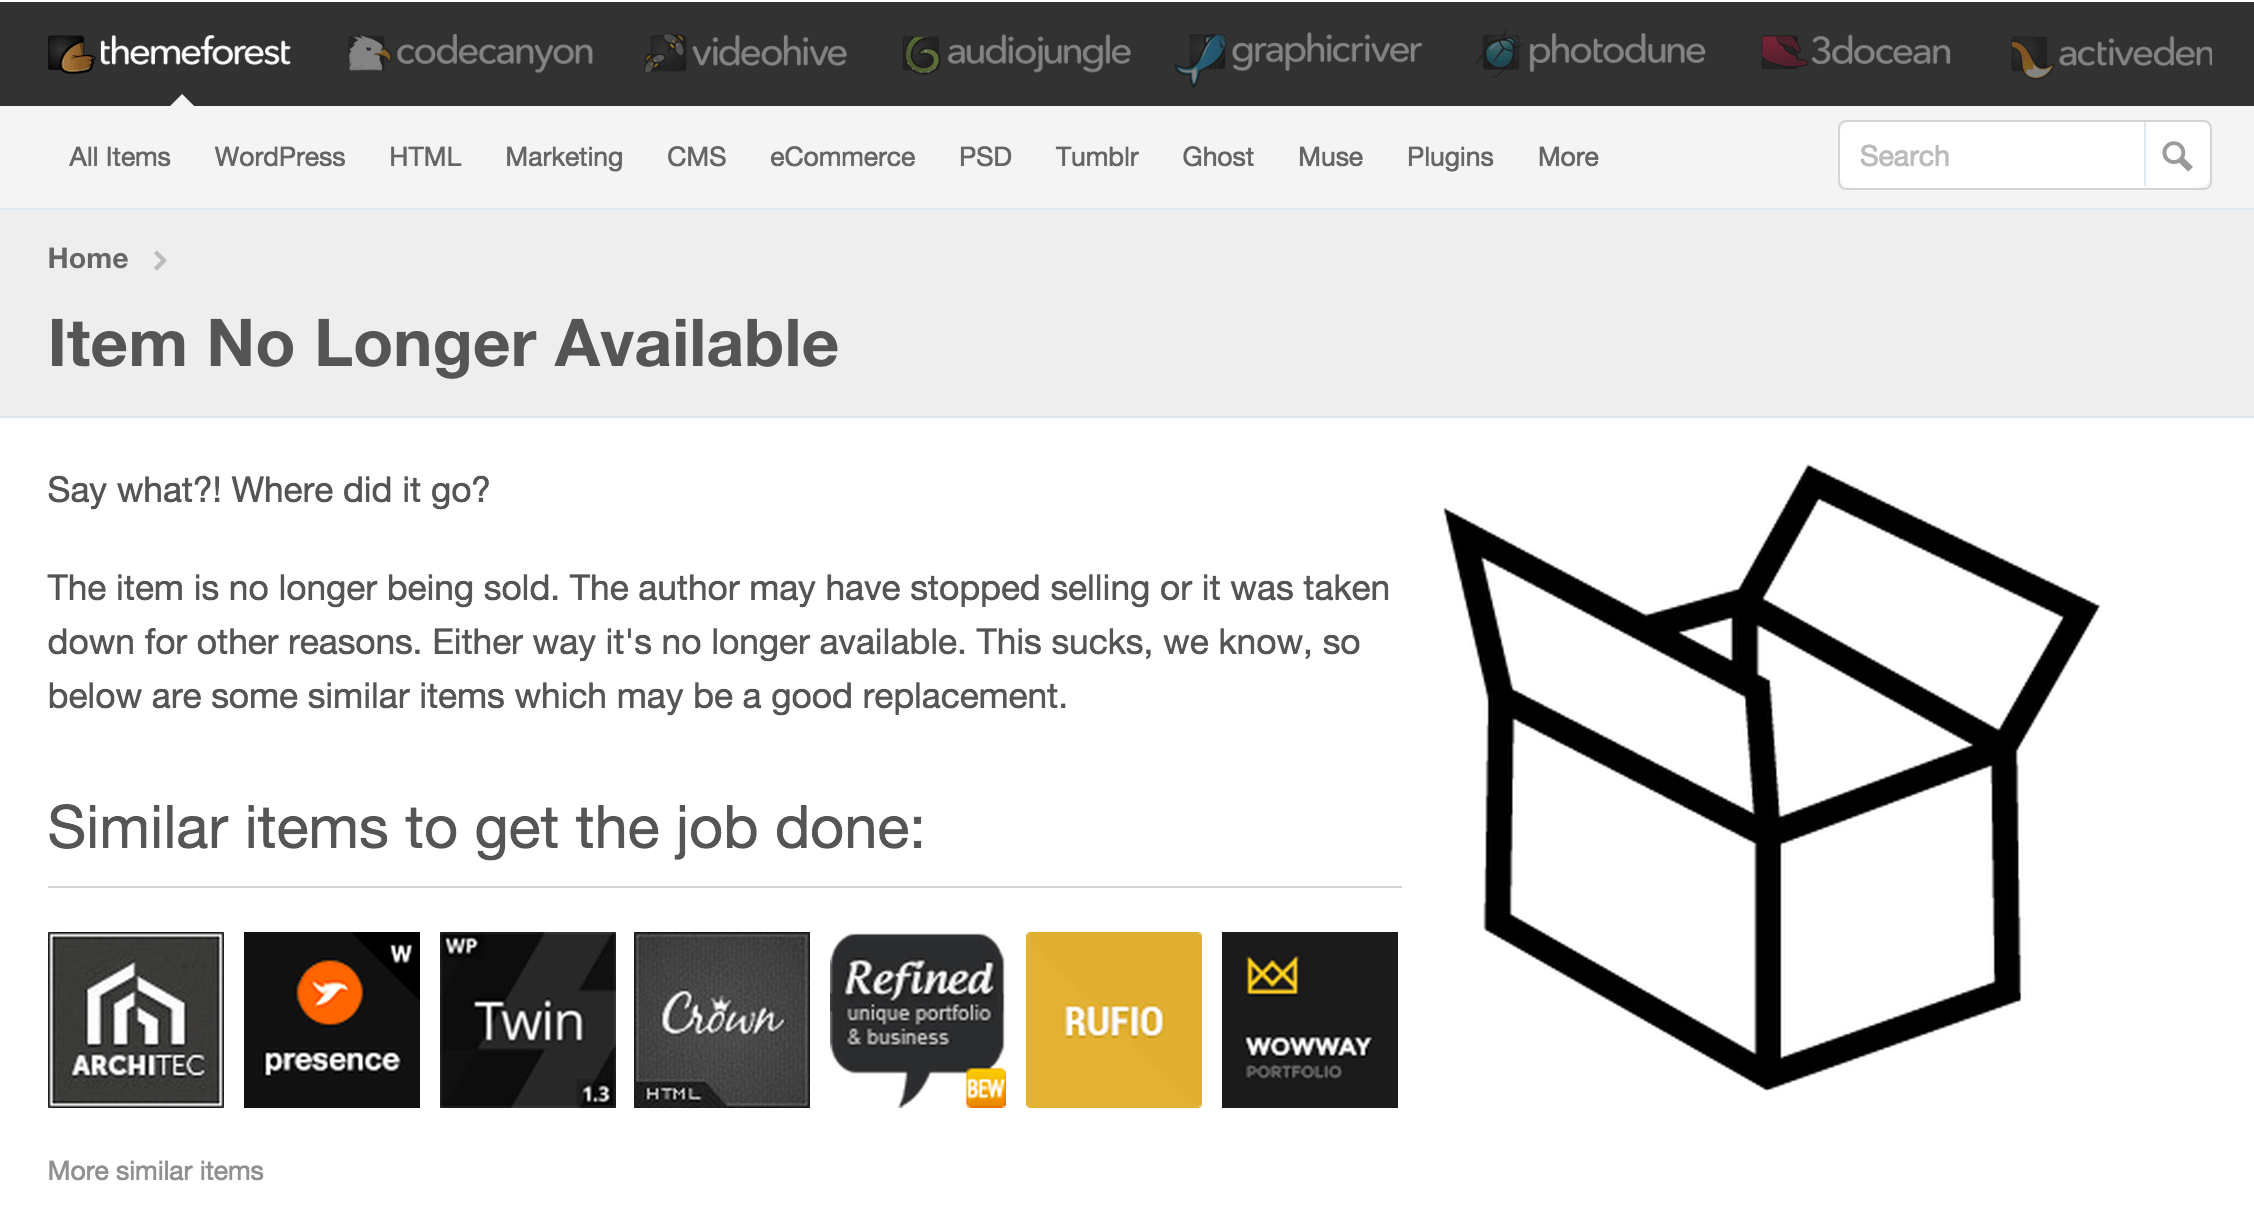 Envato has a great approach to discontinued products